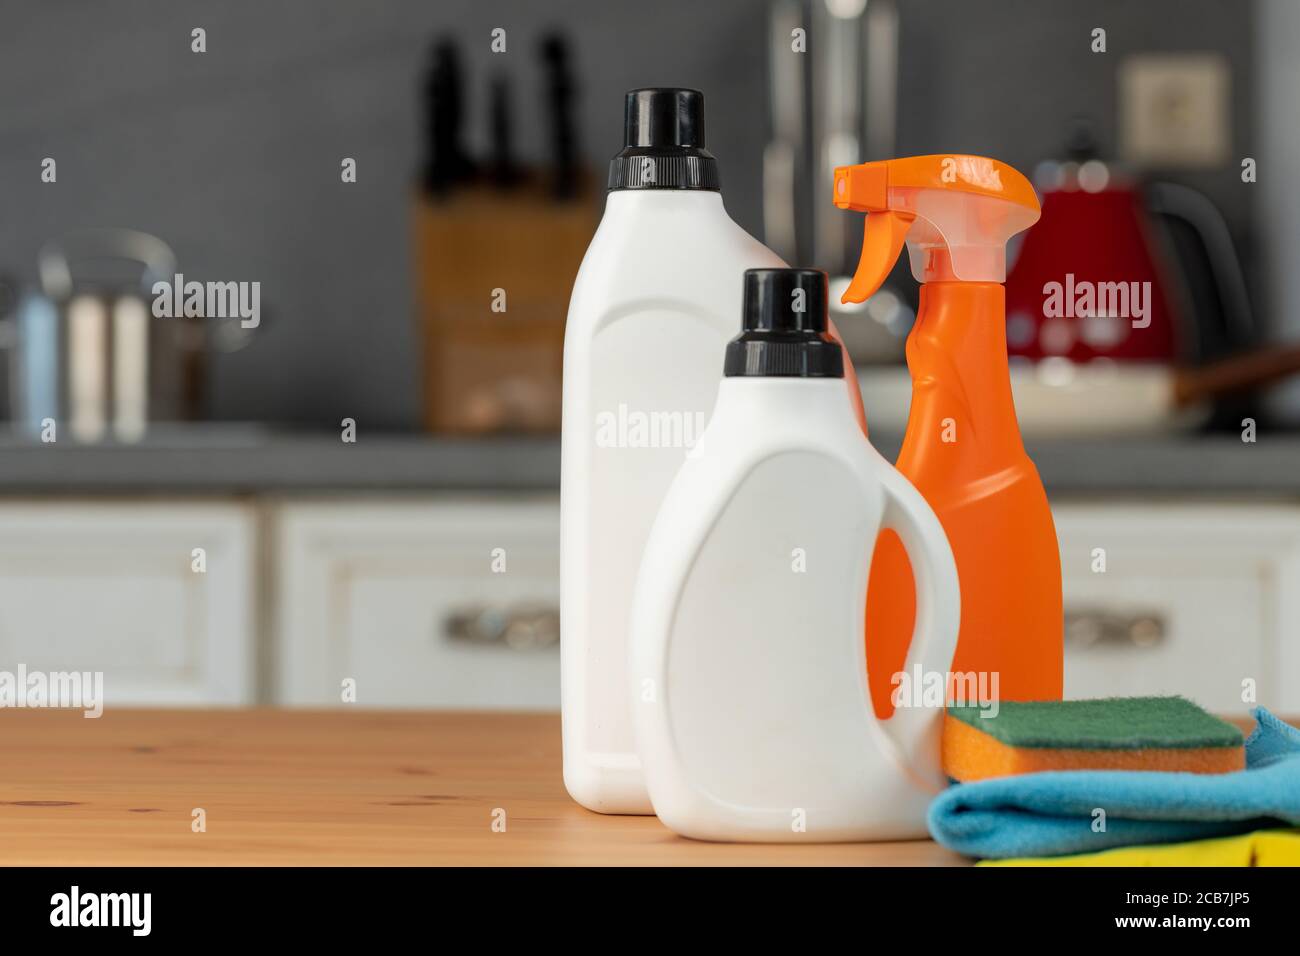 Cleaning supplies and tools on shelves and cabinets in pantry room Stock  Photo - Alamy